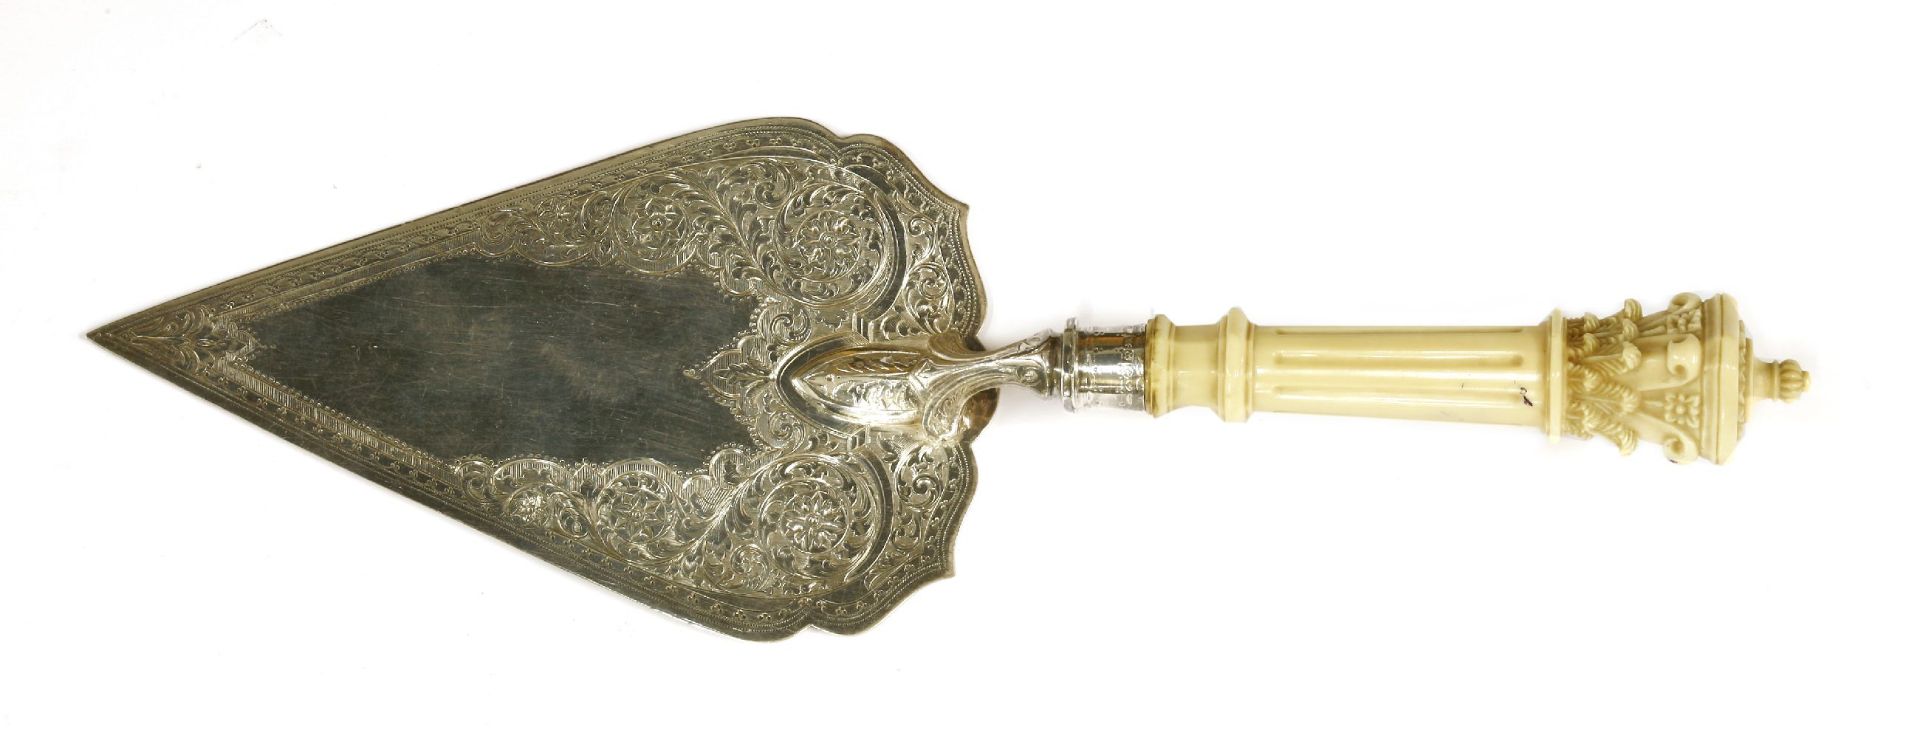 A Victorian silver and ivory ceremonial trowel,by Levesley Brothers, Sheffield, 1877,the handle